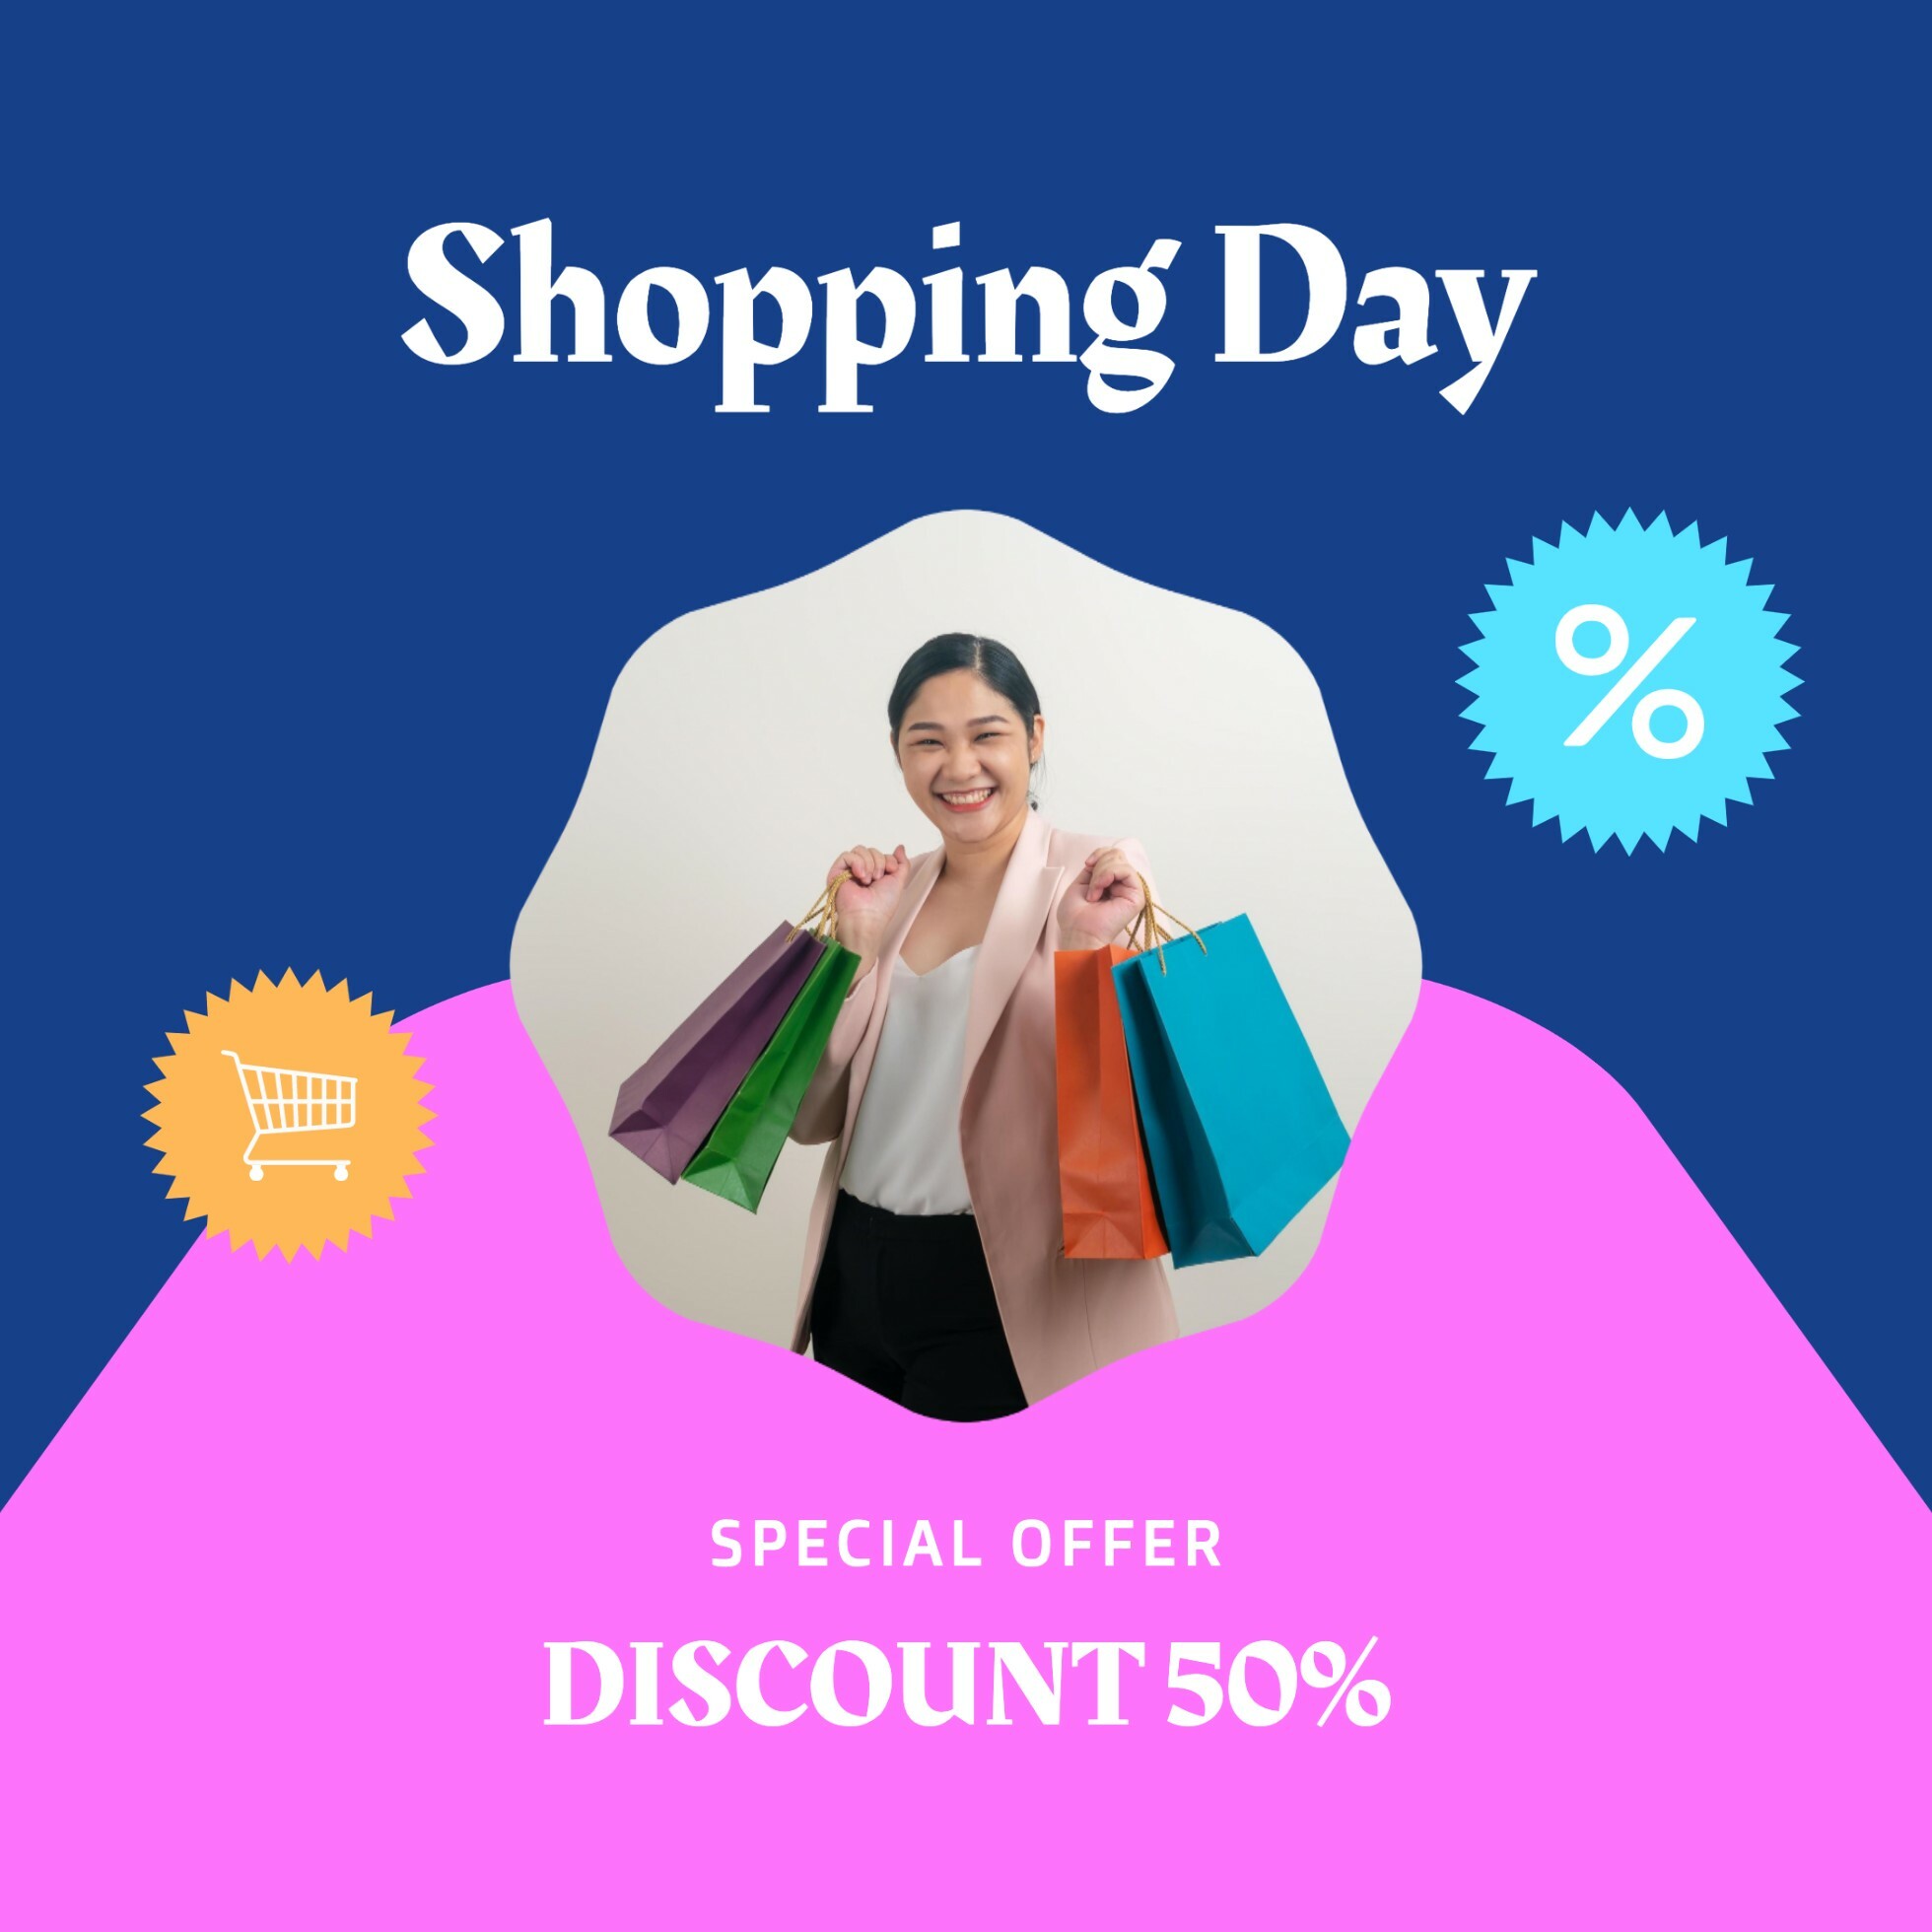 Blue Blob Shopping Day Instagram Post template